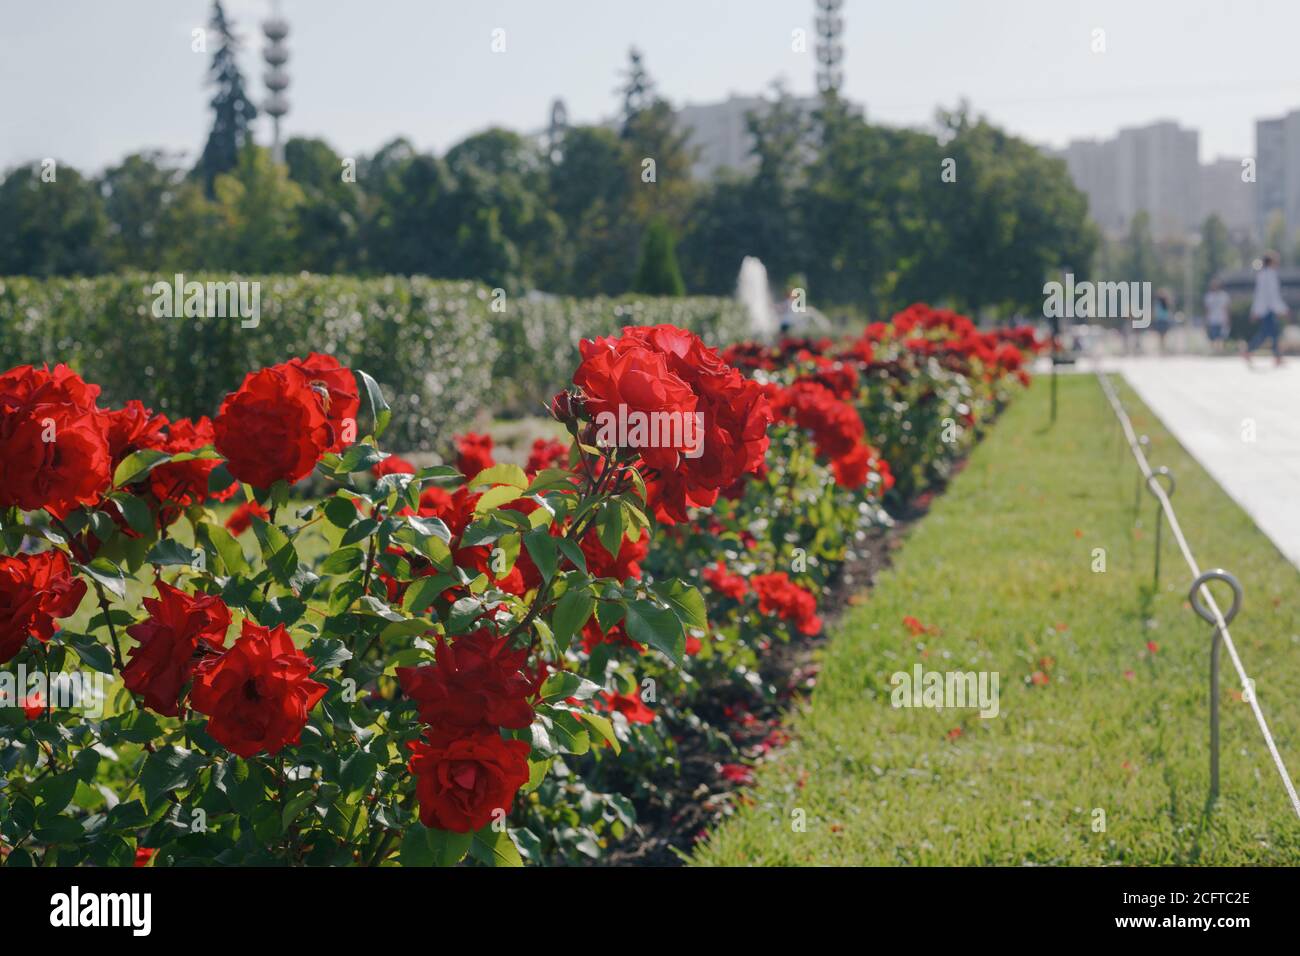 Red rose bushes close up in a public park, vintage toned. Beautiful landscape design in urban parks Stock Photo